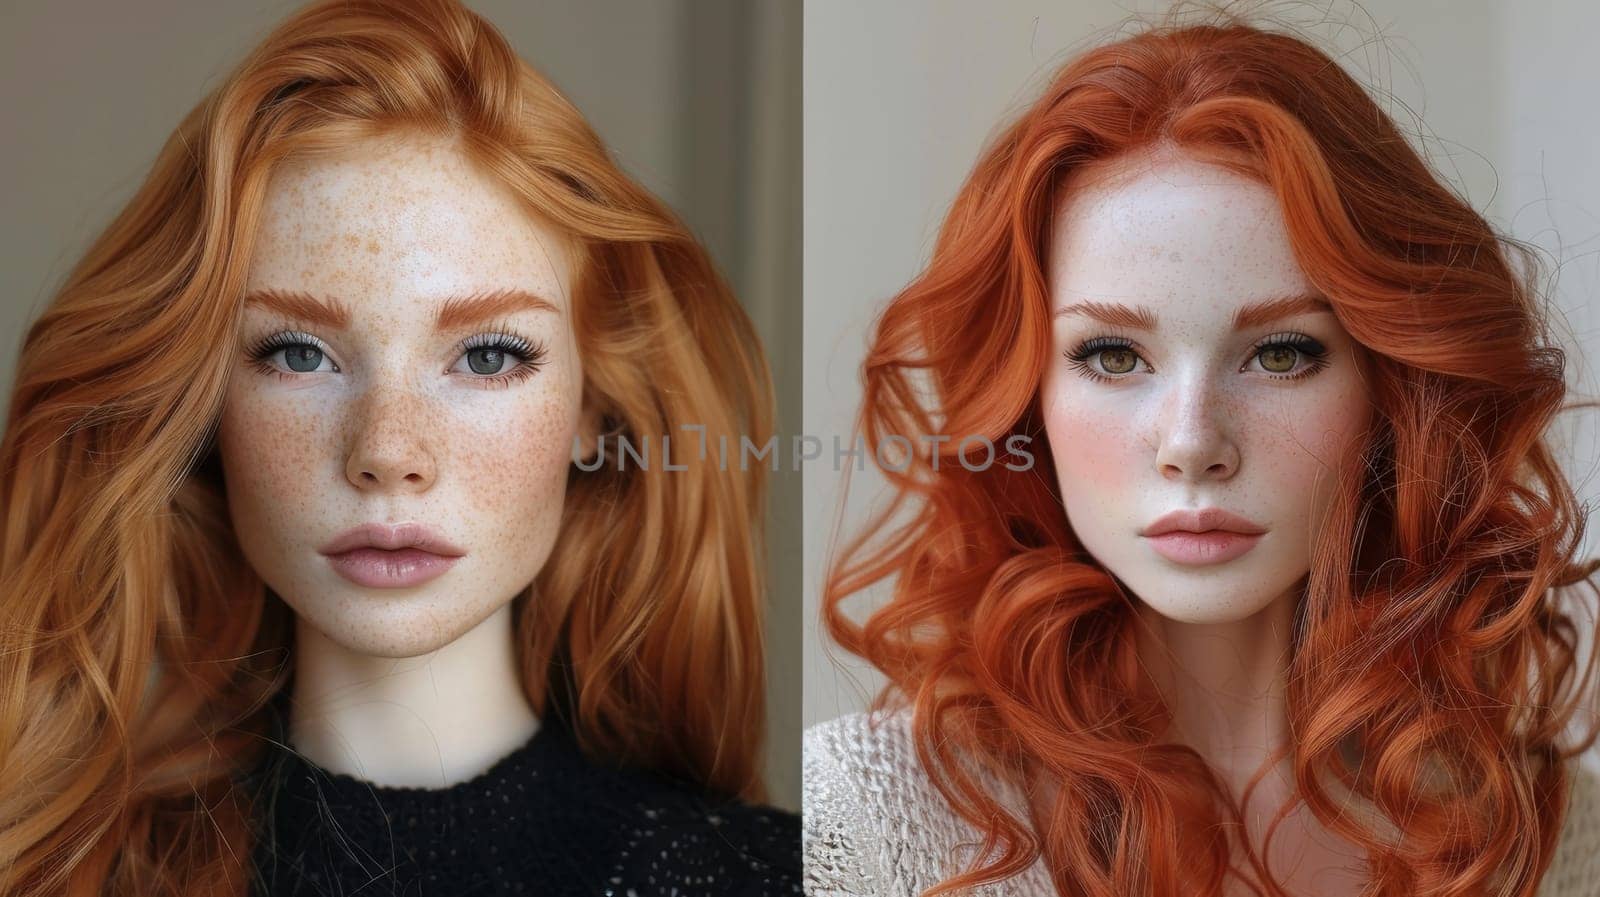 Two different pictures of a woman with red hair and freckles